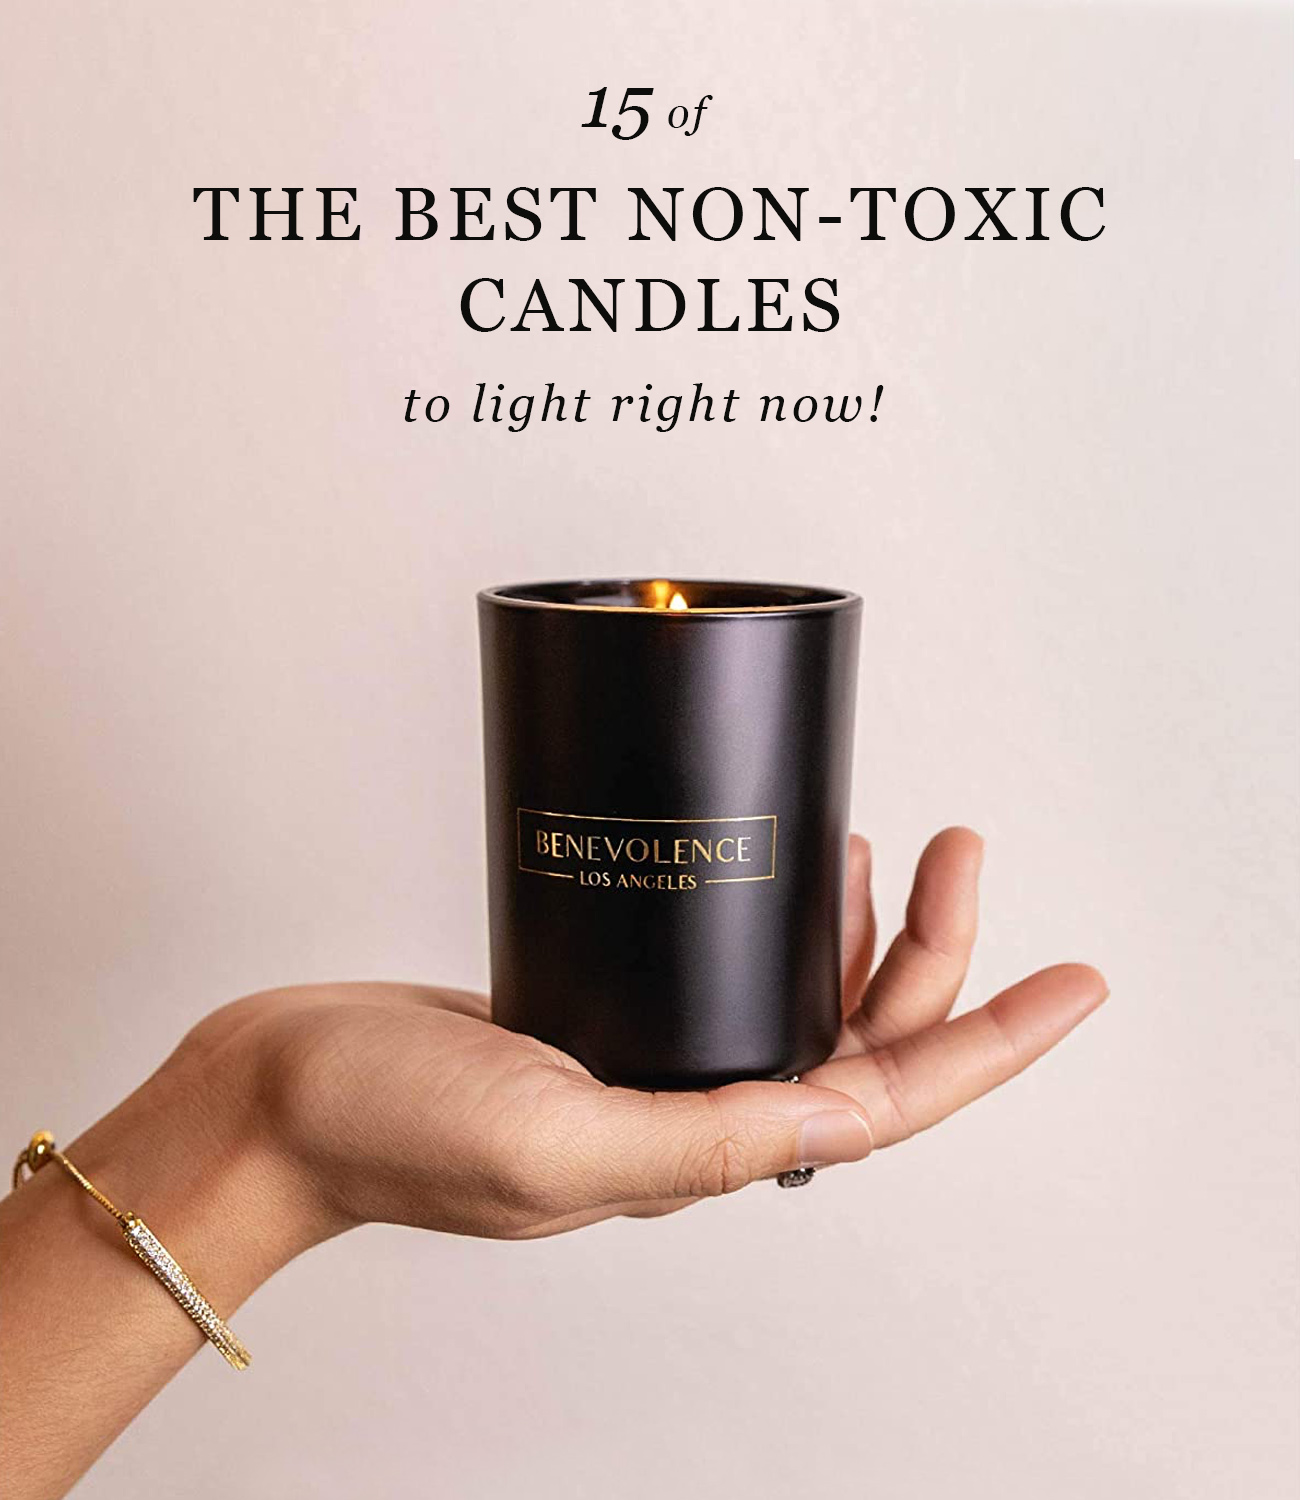 The Best Non-Toxic Candles to Buy Now